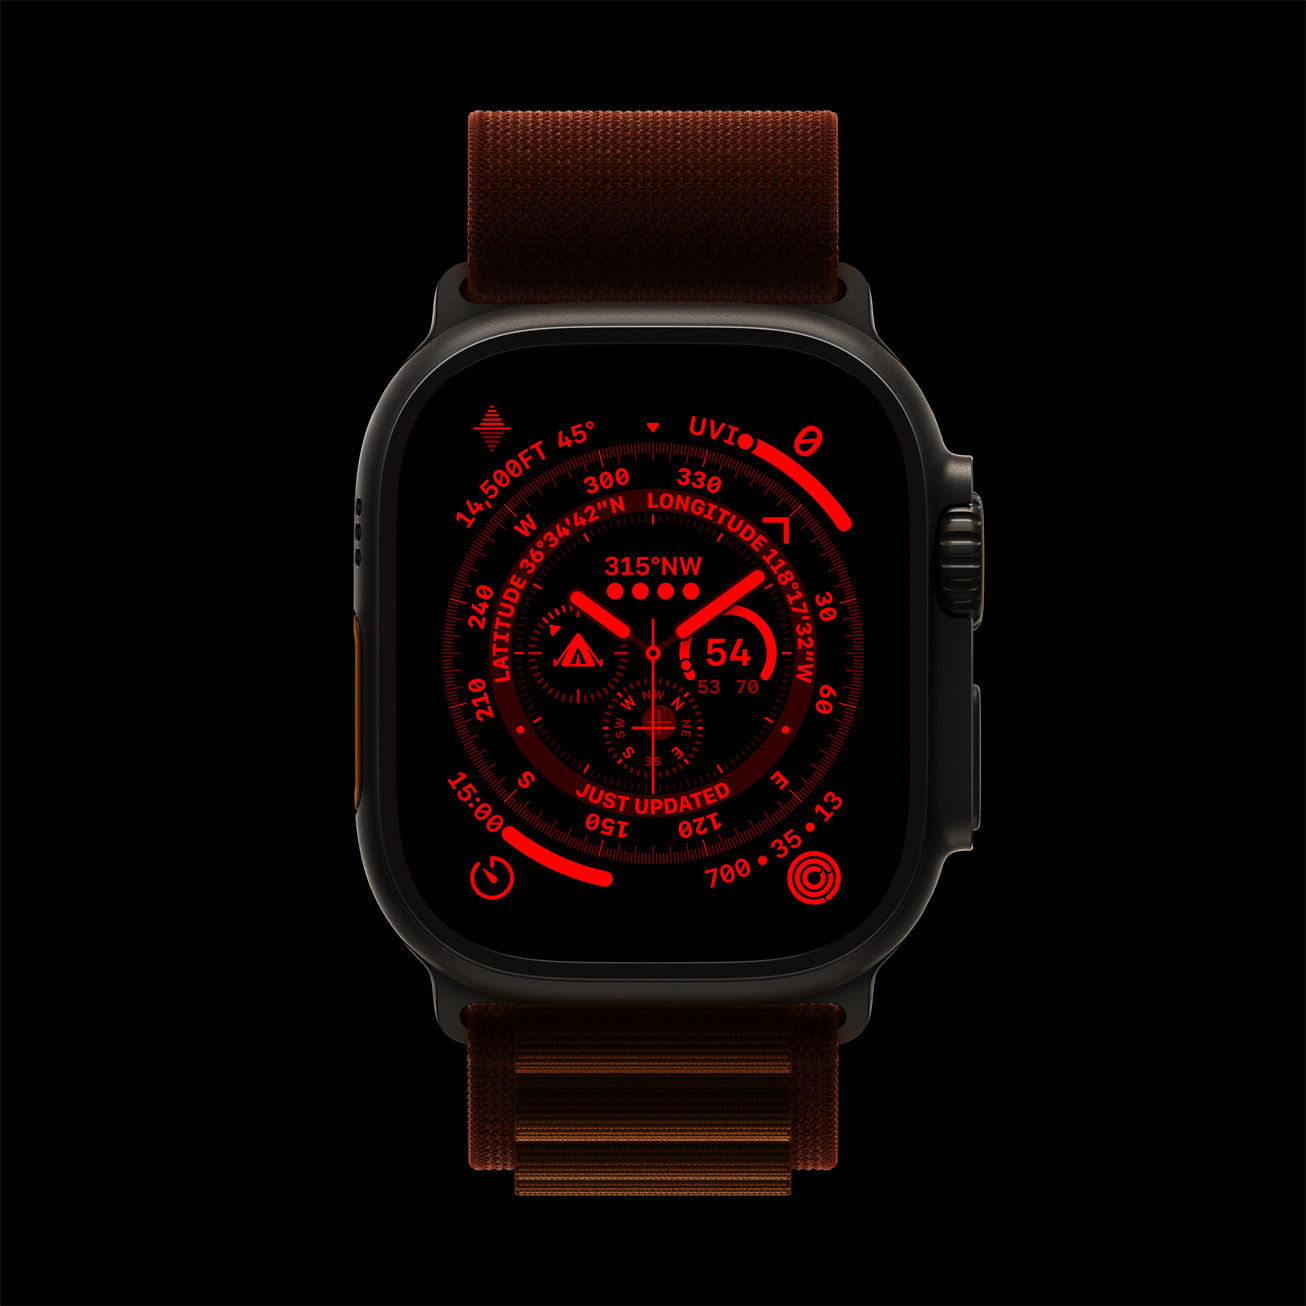 new-apple-watch-ultra-unveiled-with-exclusive-watch-face-and-bands